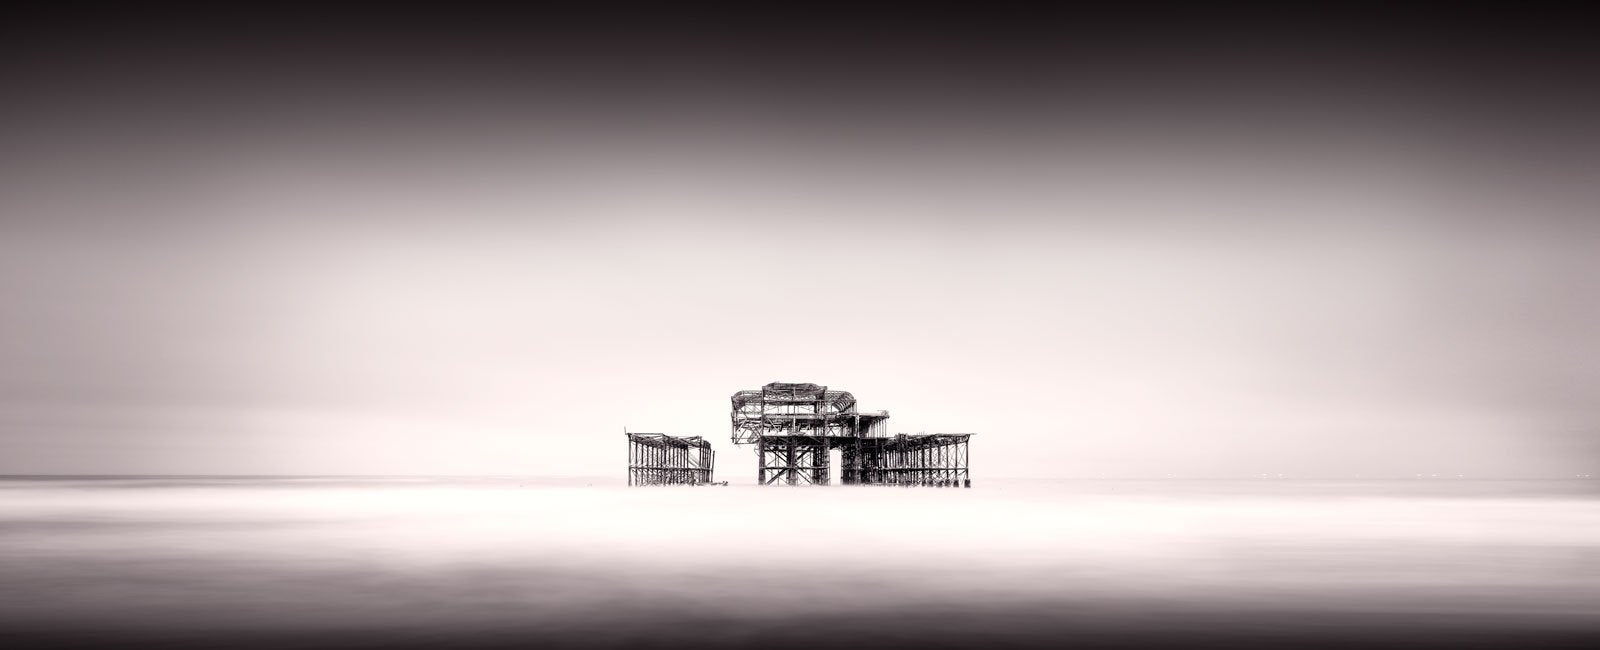 The West Pier Brighton by Neil Williams